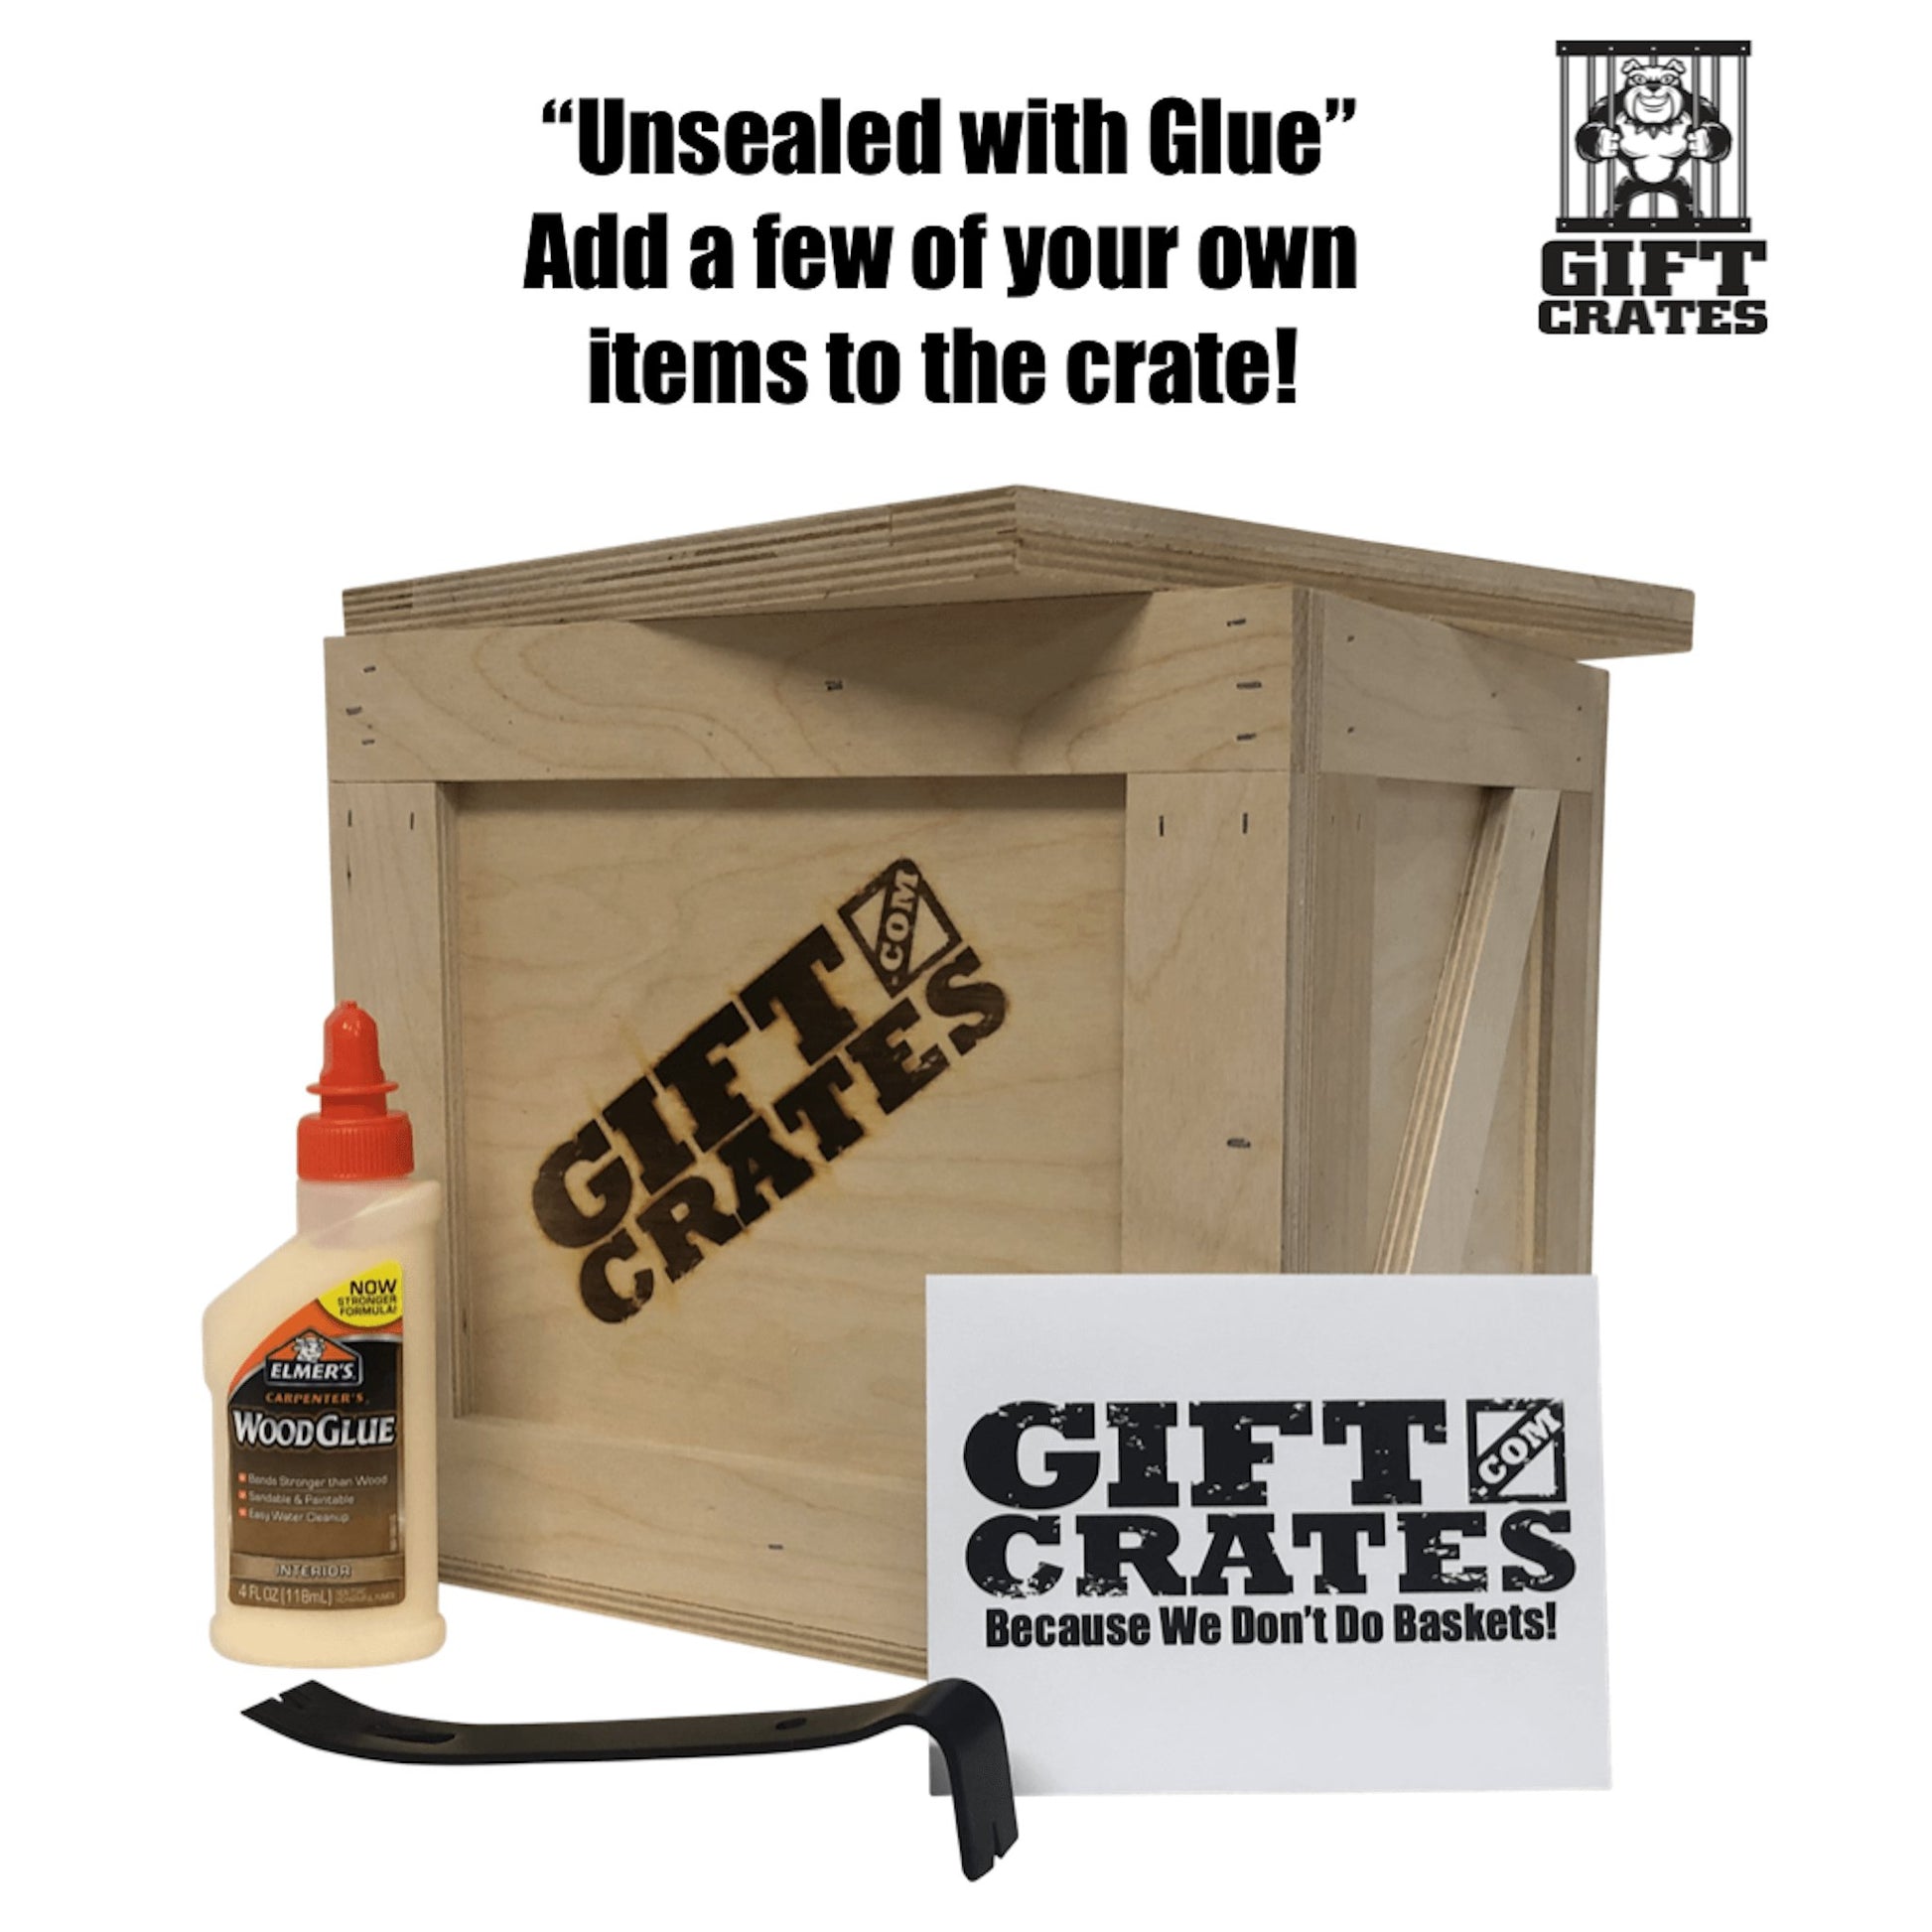 Game Night Crate - Gift Crates